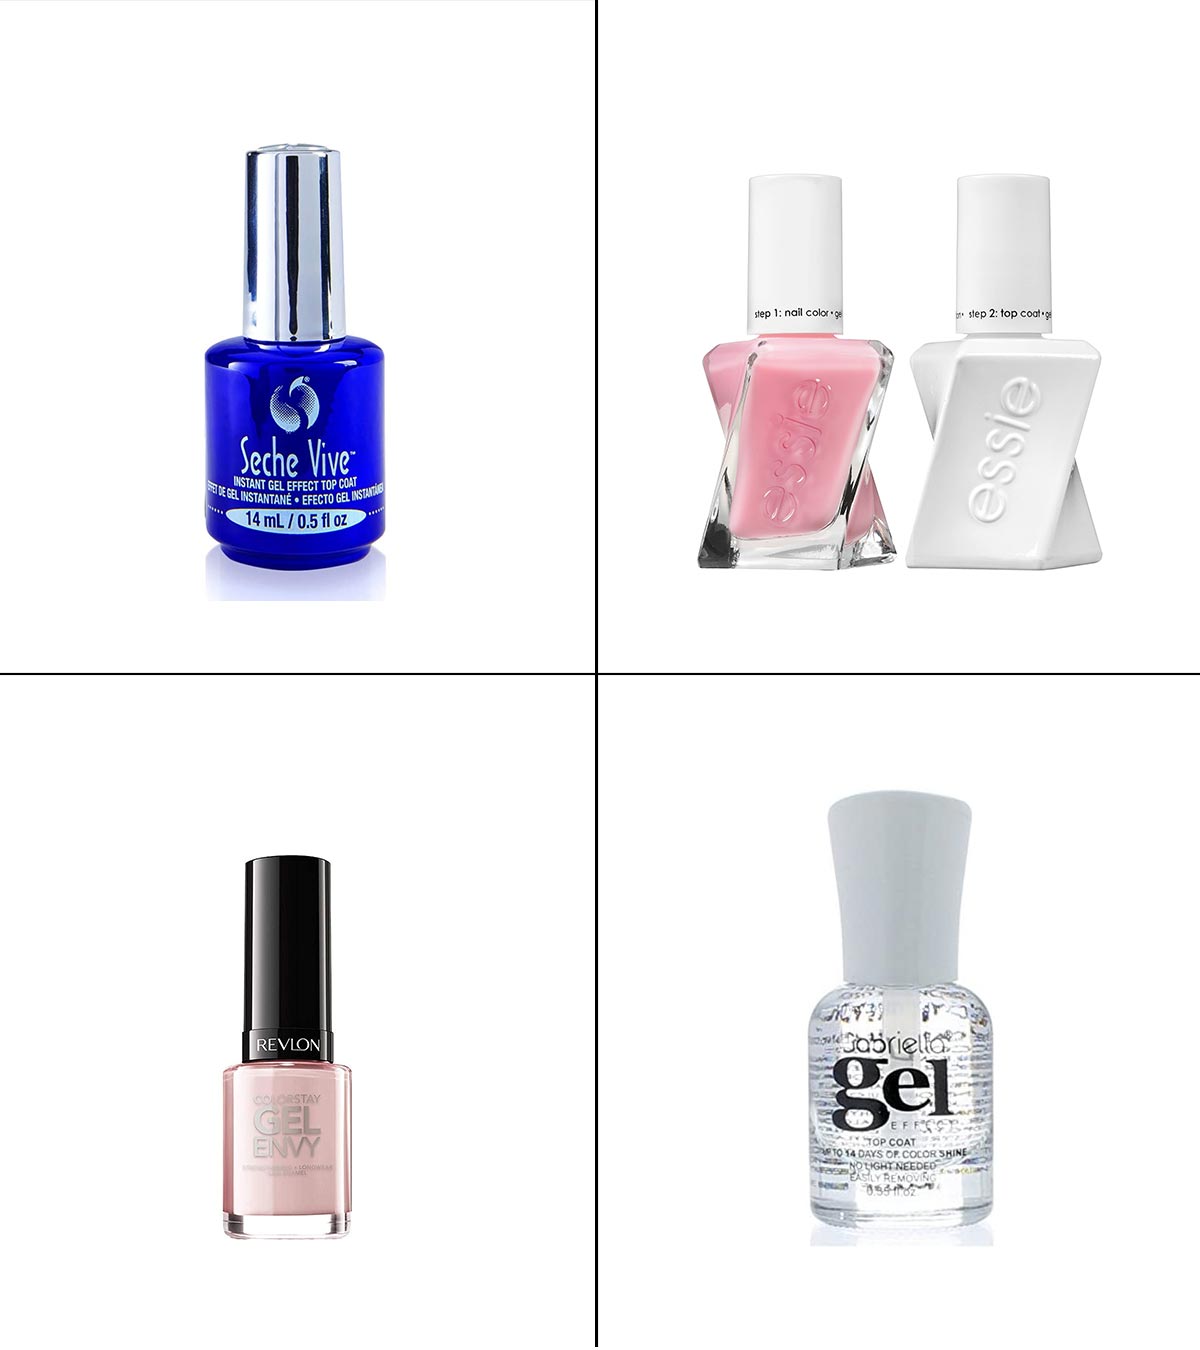 Any issues mixing gel polish brands and UV light brands? : r/Nails